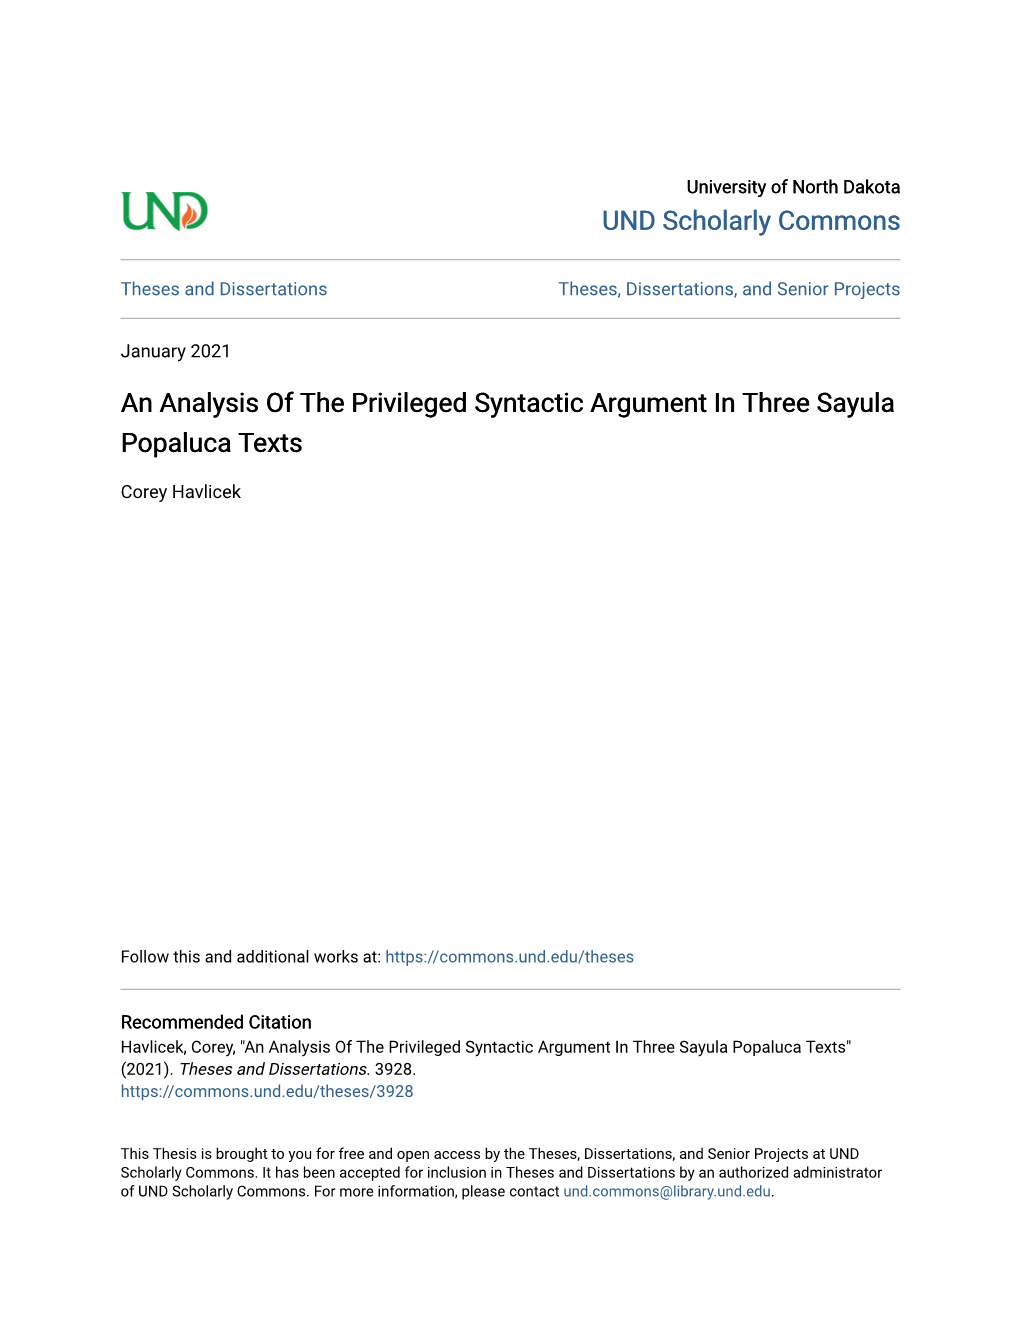 An Analysis of the Privileged Syntactic Argument in Three Sayula Popaluca Texts